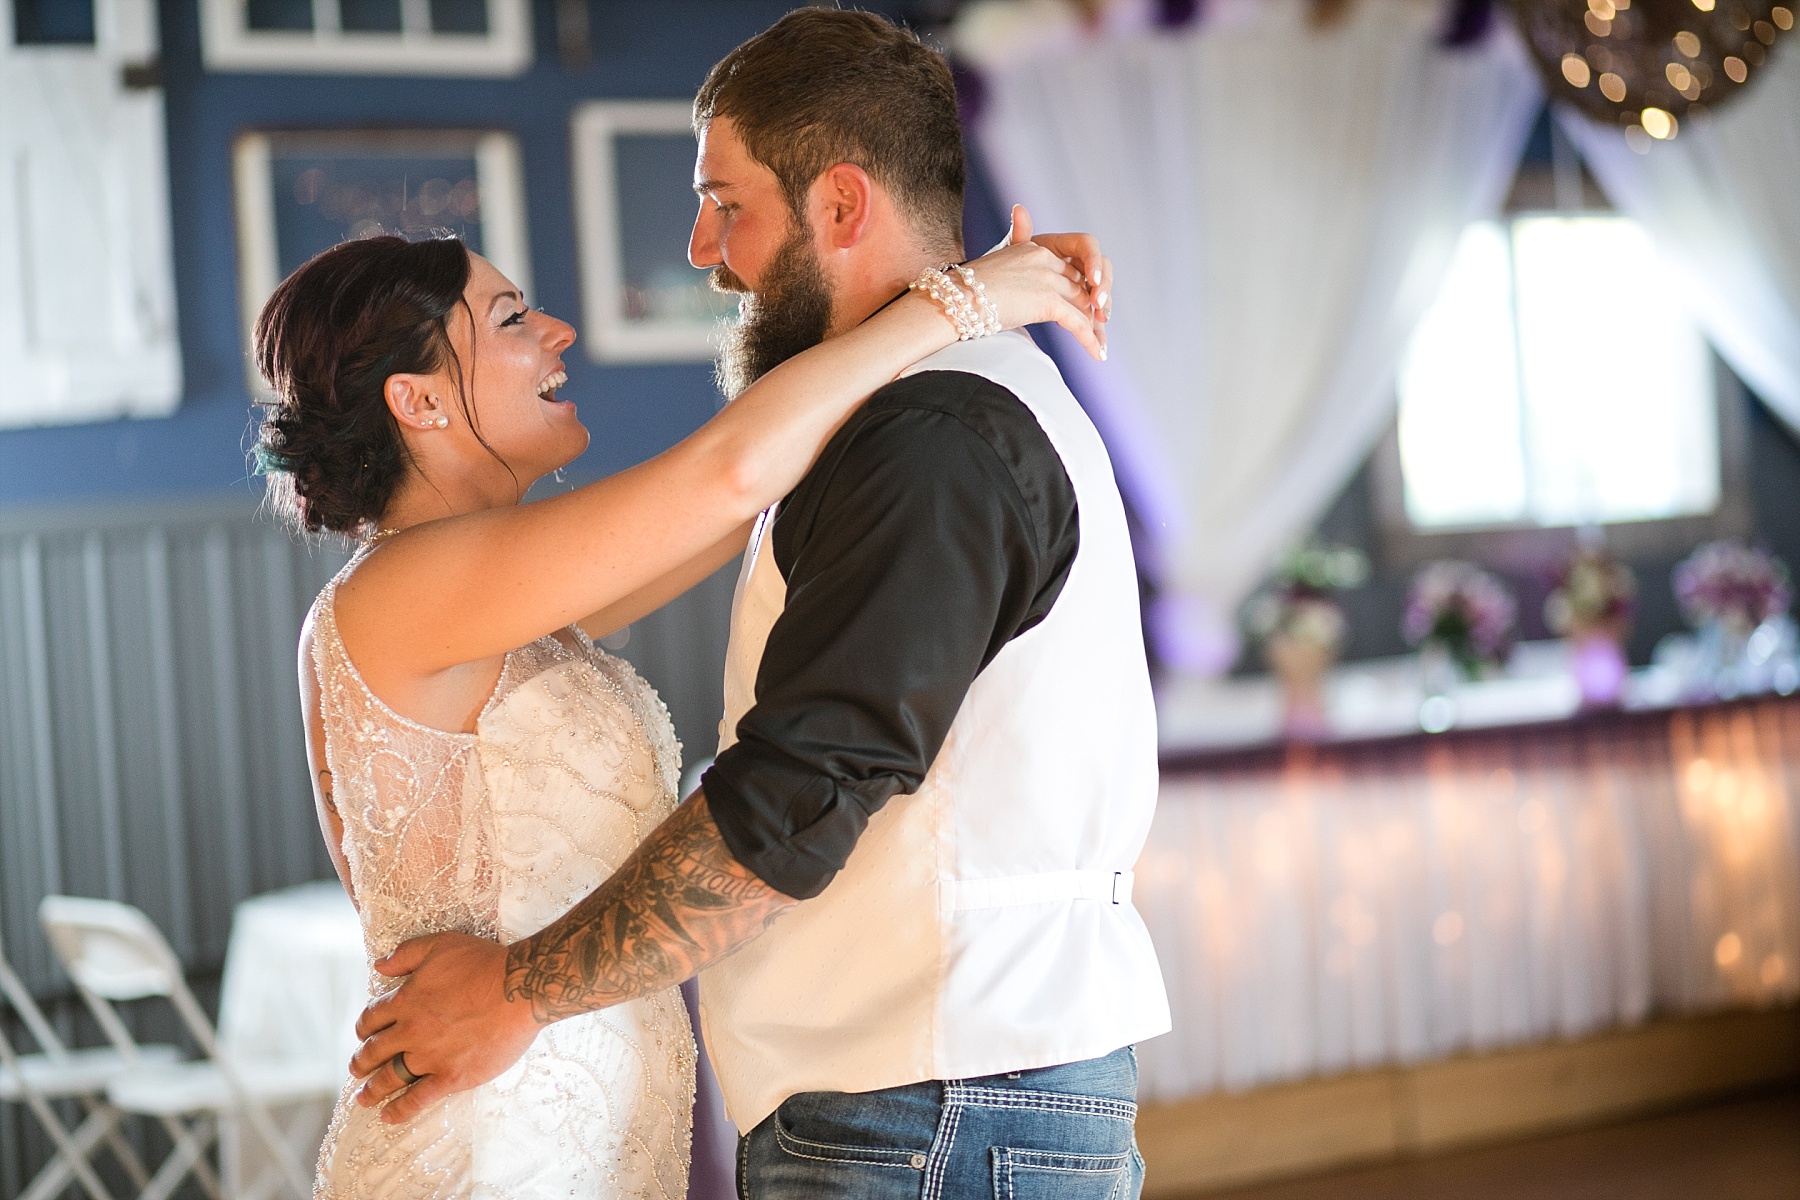 Pulled by a horse-drawn carriage, Cain had tears in his eyes waiting to see Michele walk down the aisle at their Dixon's Apple Orchard wedding in Cadott, WI.